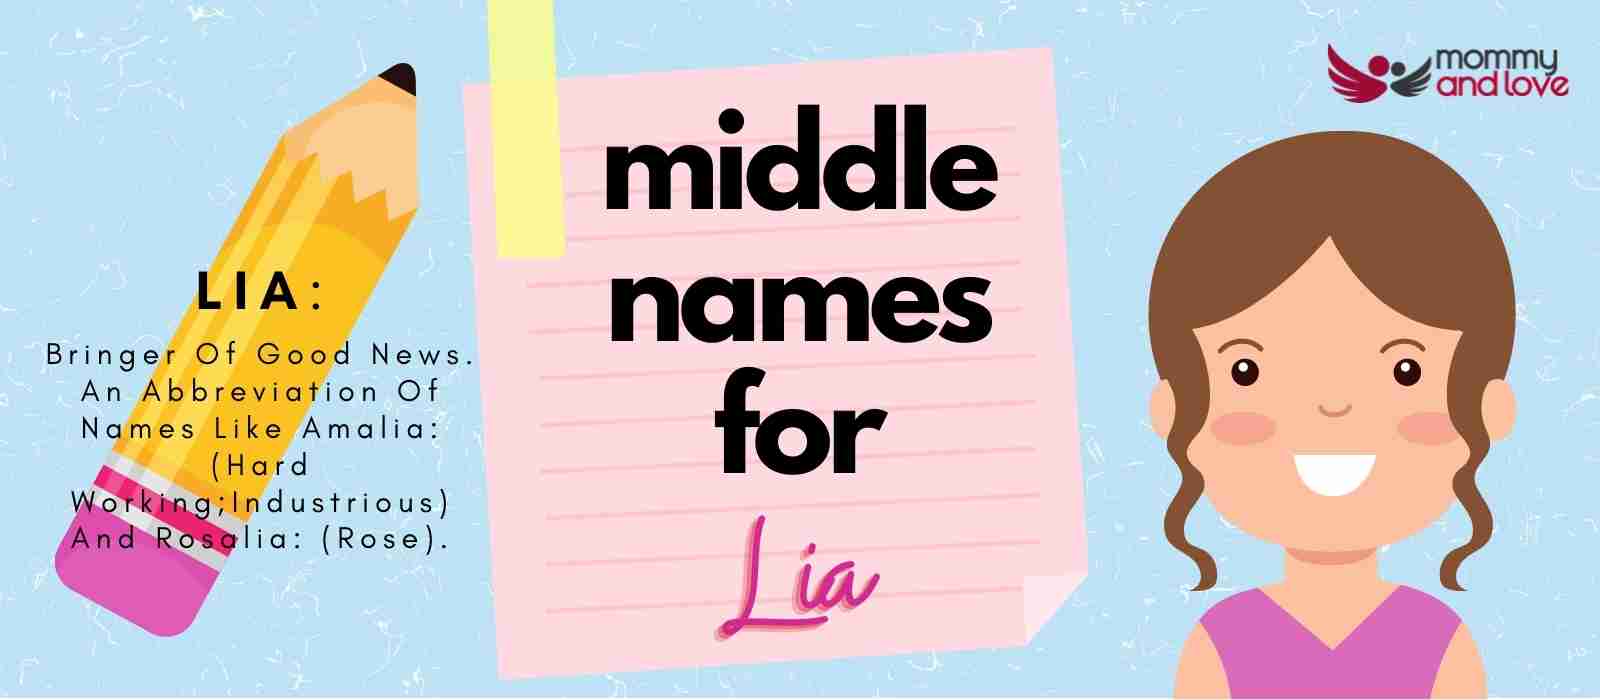 Middle Names for Lia